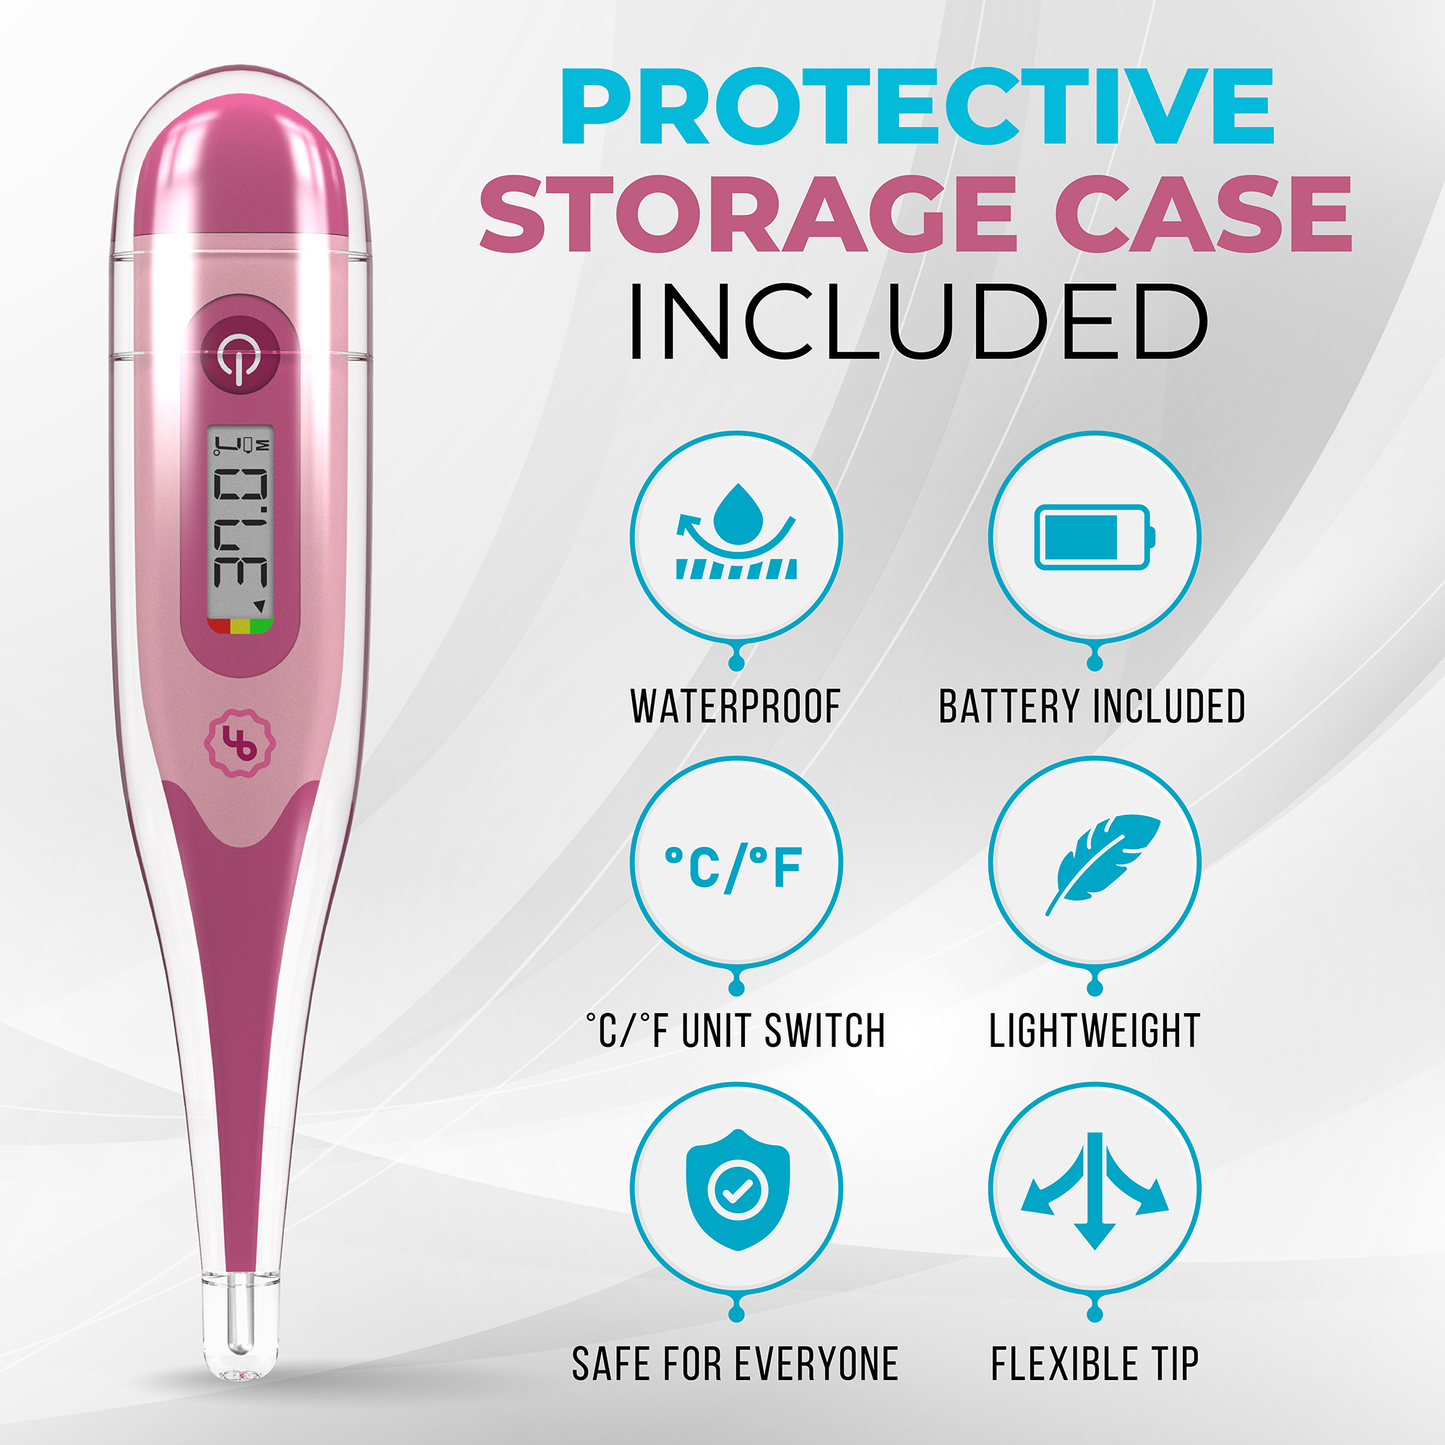 ByFloProducts Digital Thermometer - Flexible Tip - Oral Thermometer, Rectal & Underarm (DMT-4333 Pink)